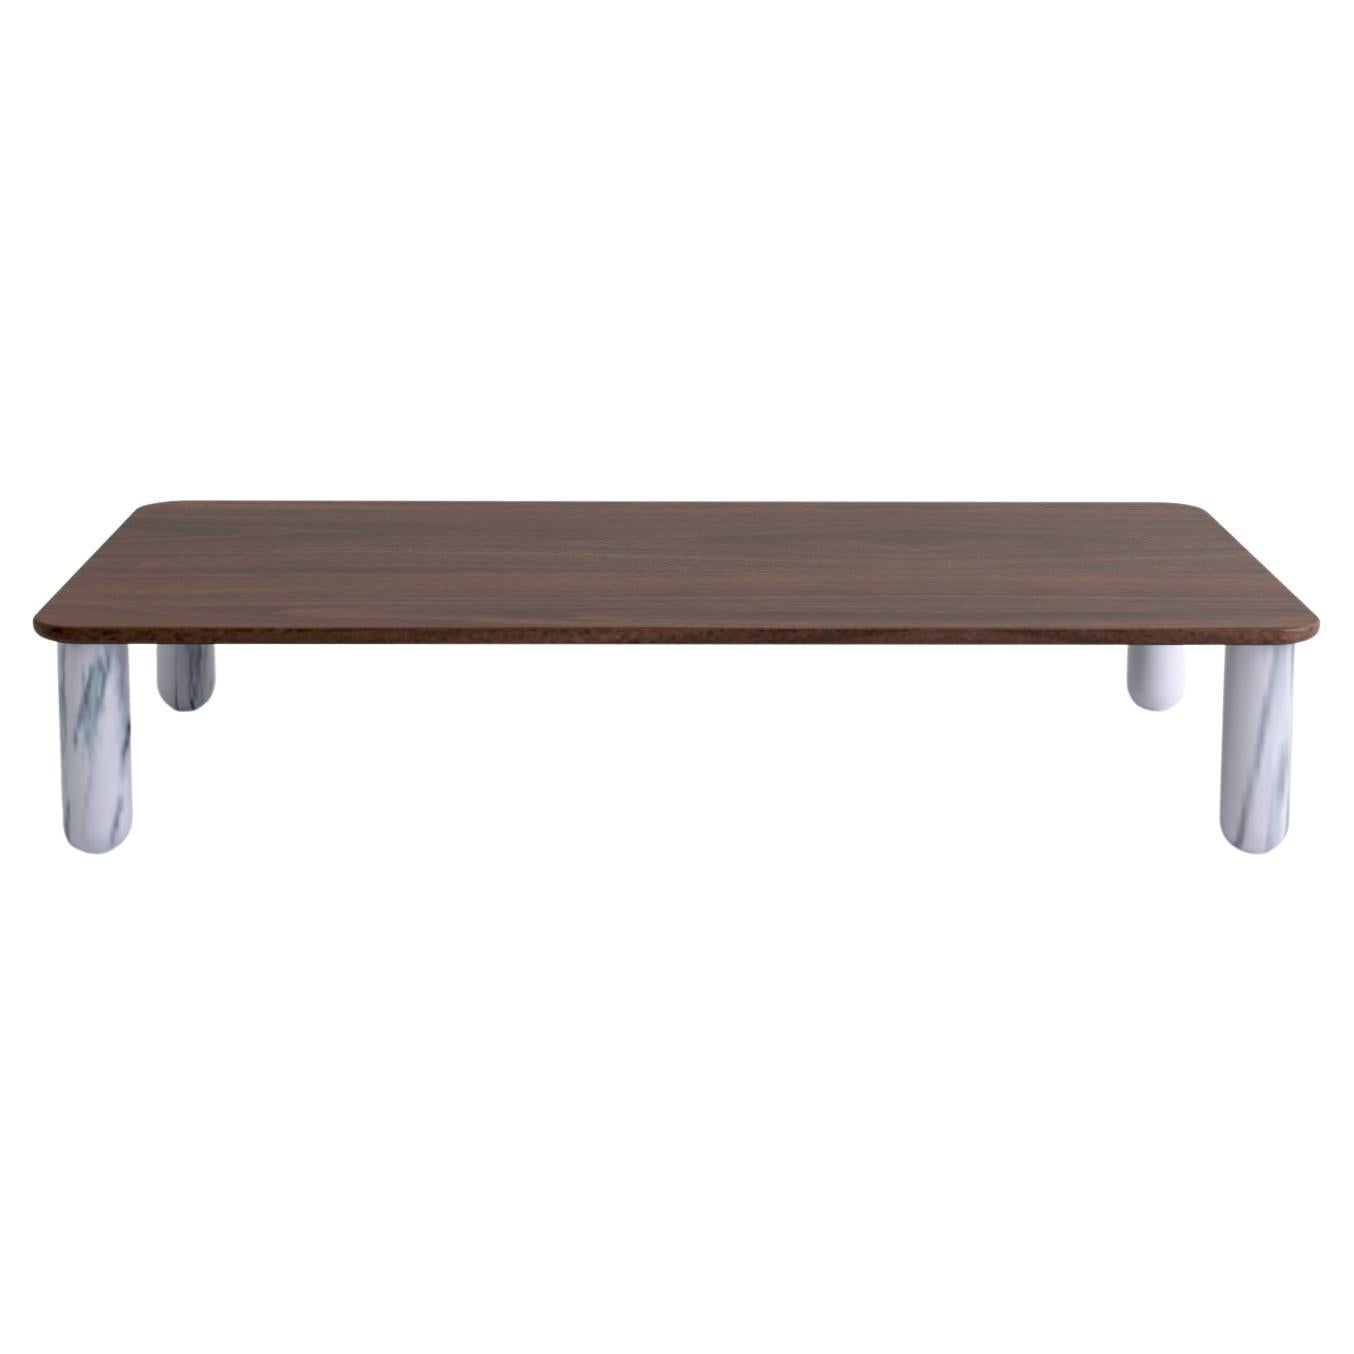 XLarge Walnut and White Marble "Sunday" Coffee Table, Jean-Baptiste Souletie For Sale